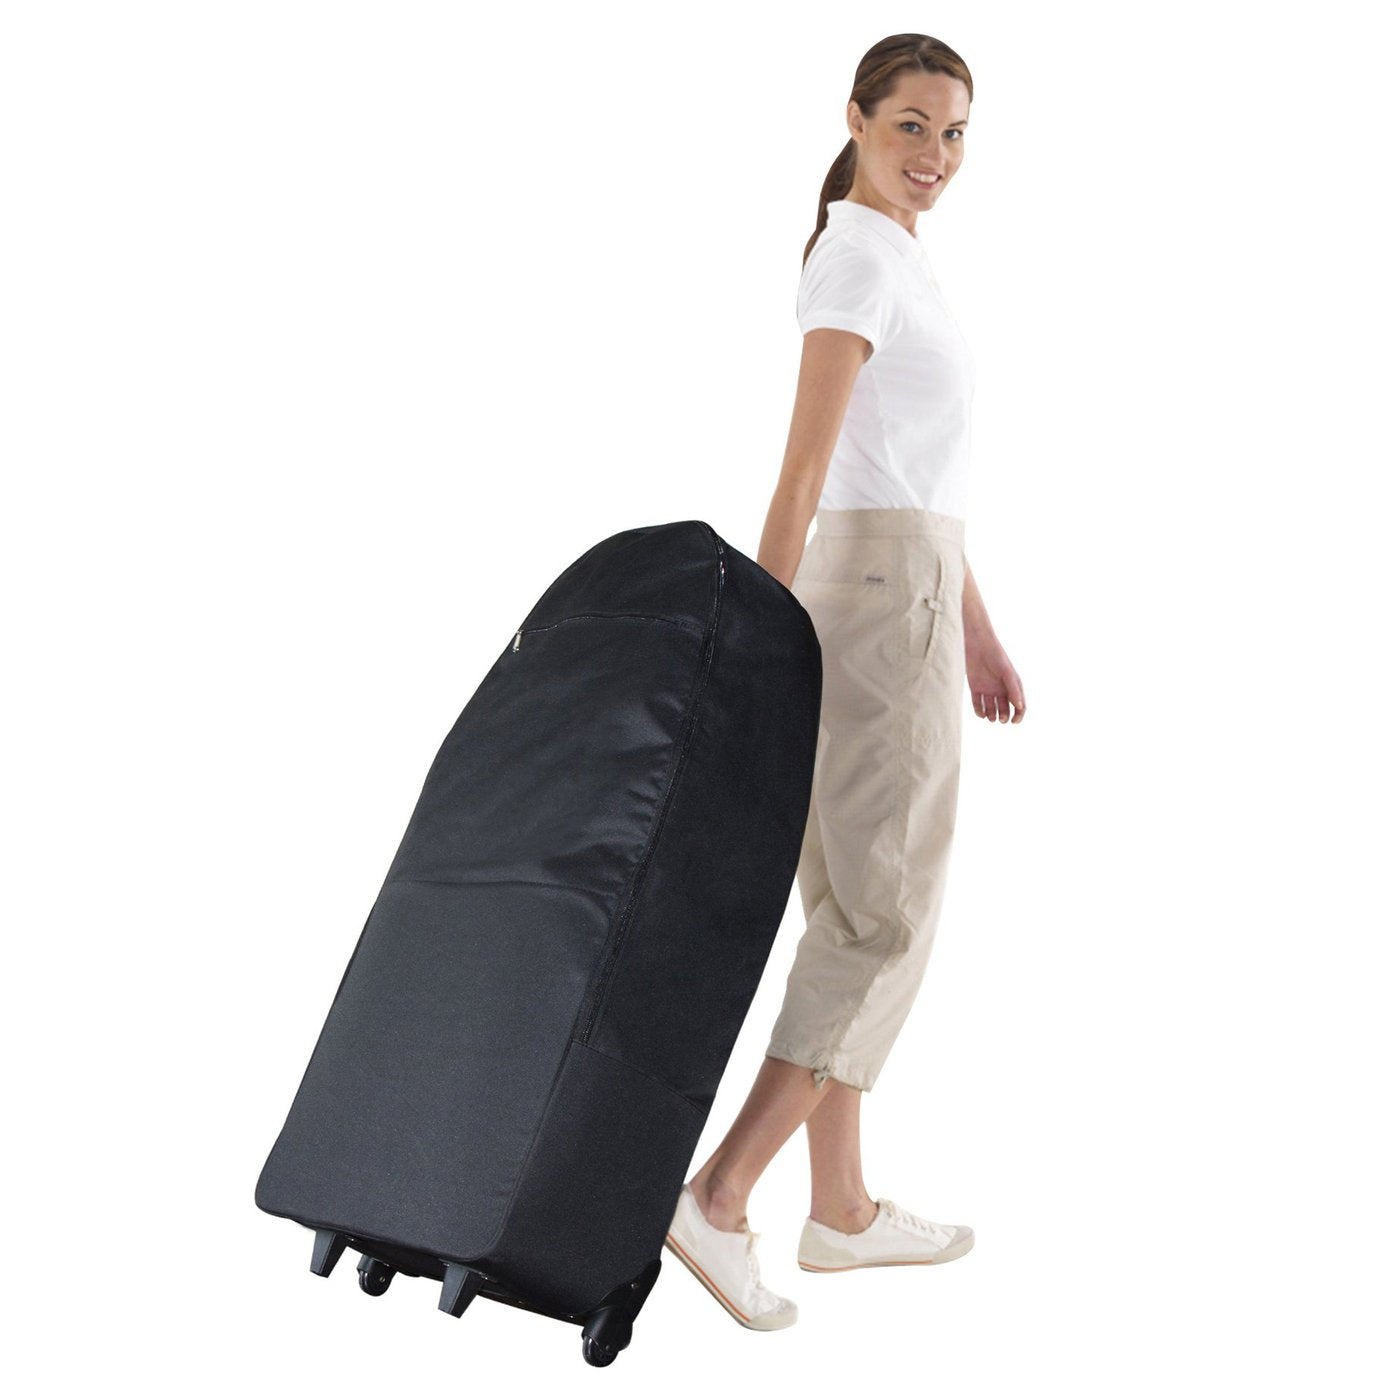 Wheeled Carrying Case for Professional Chair